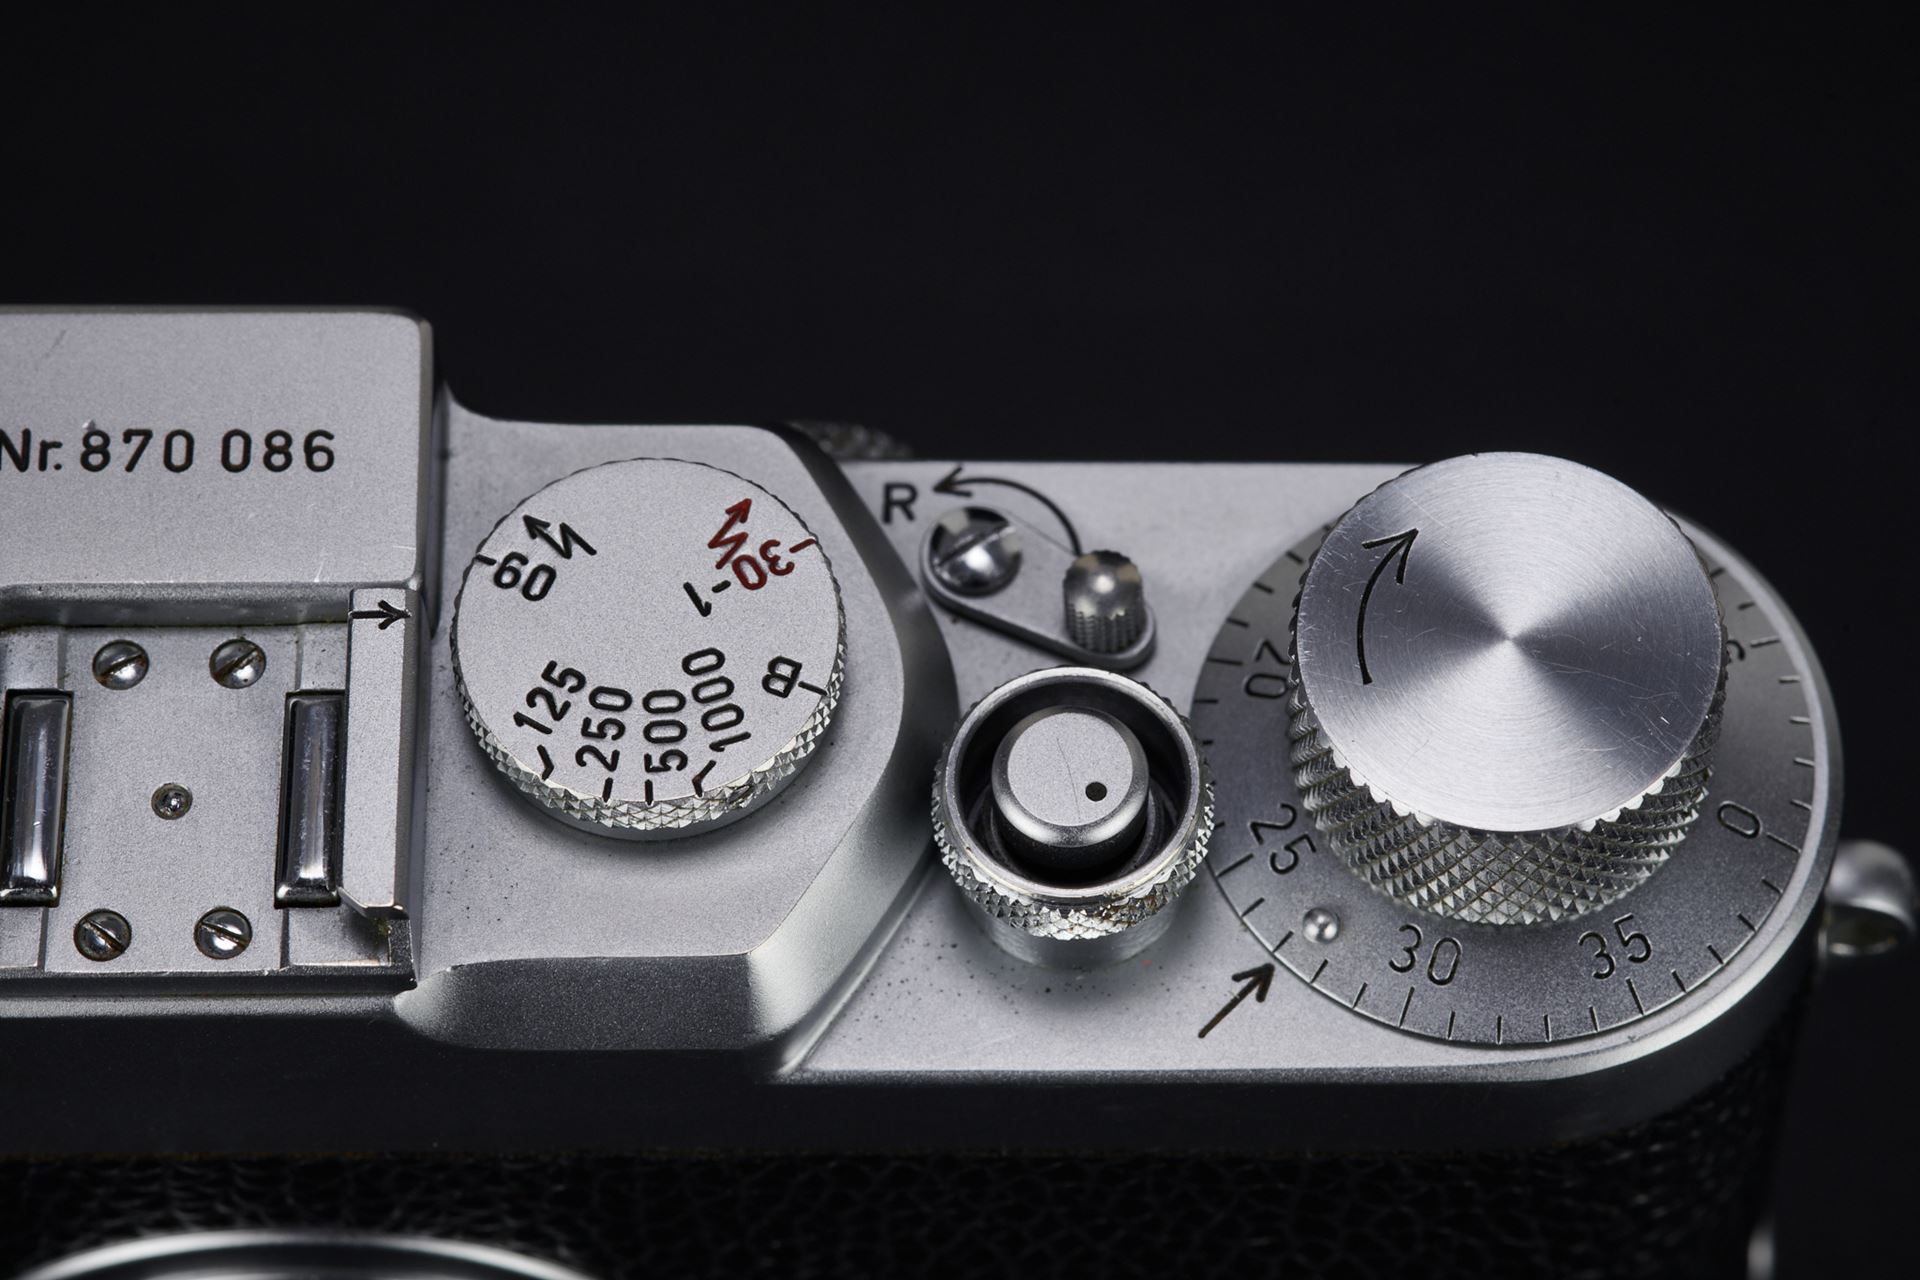 Picture of Leica IIIG Chrome w/ Leicavit